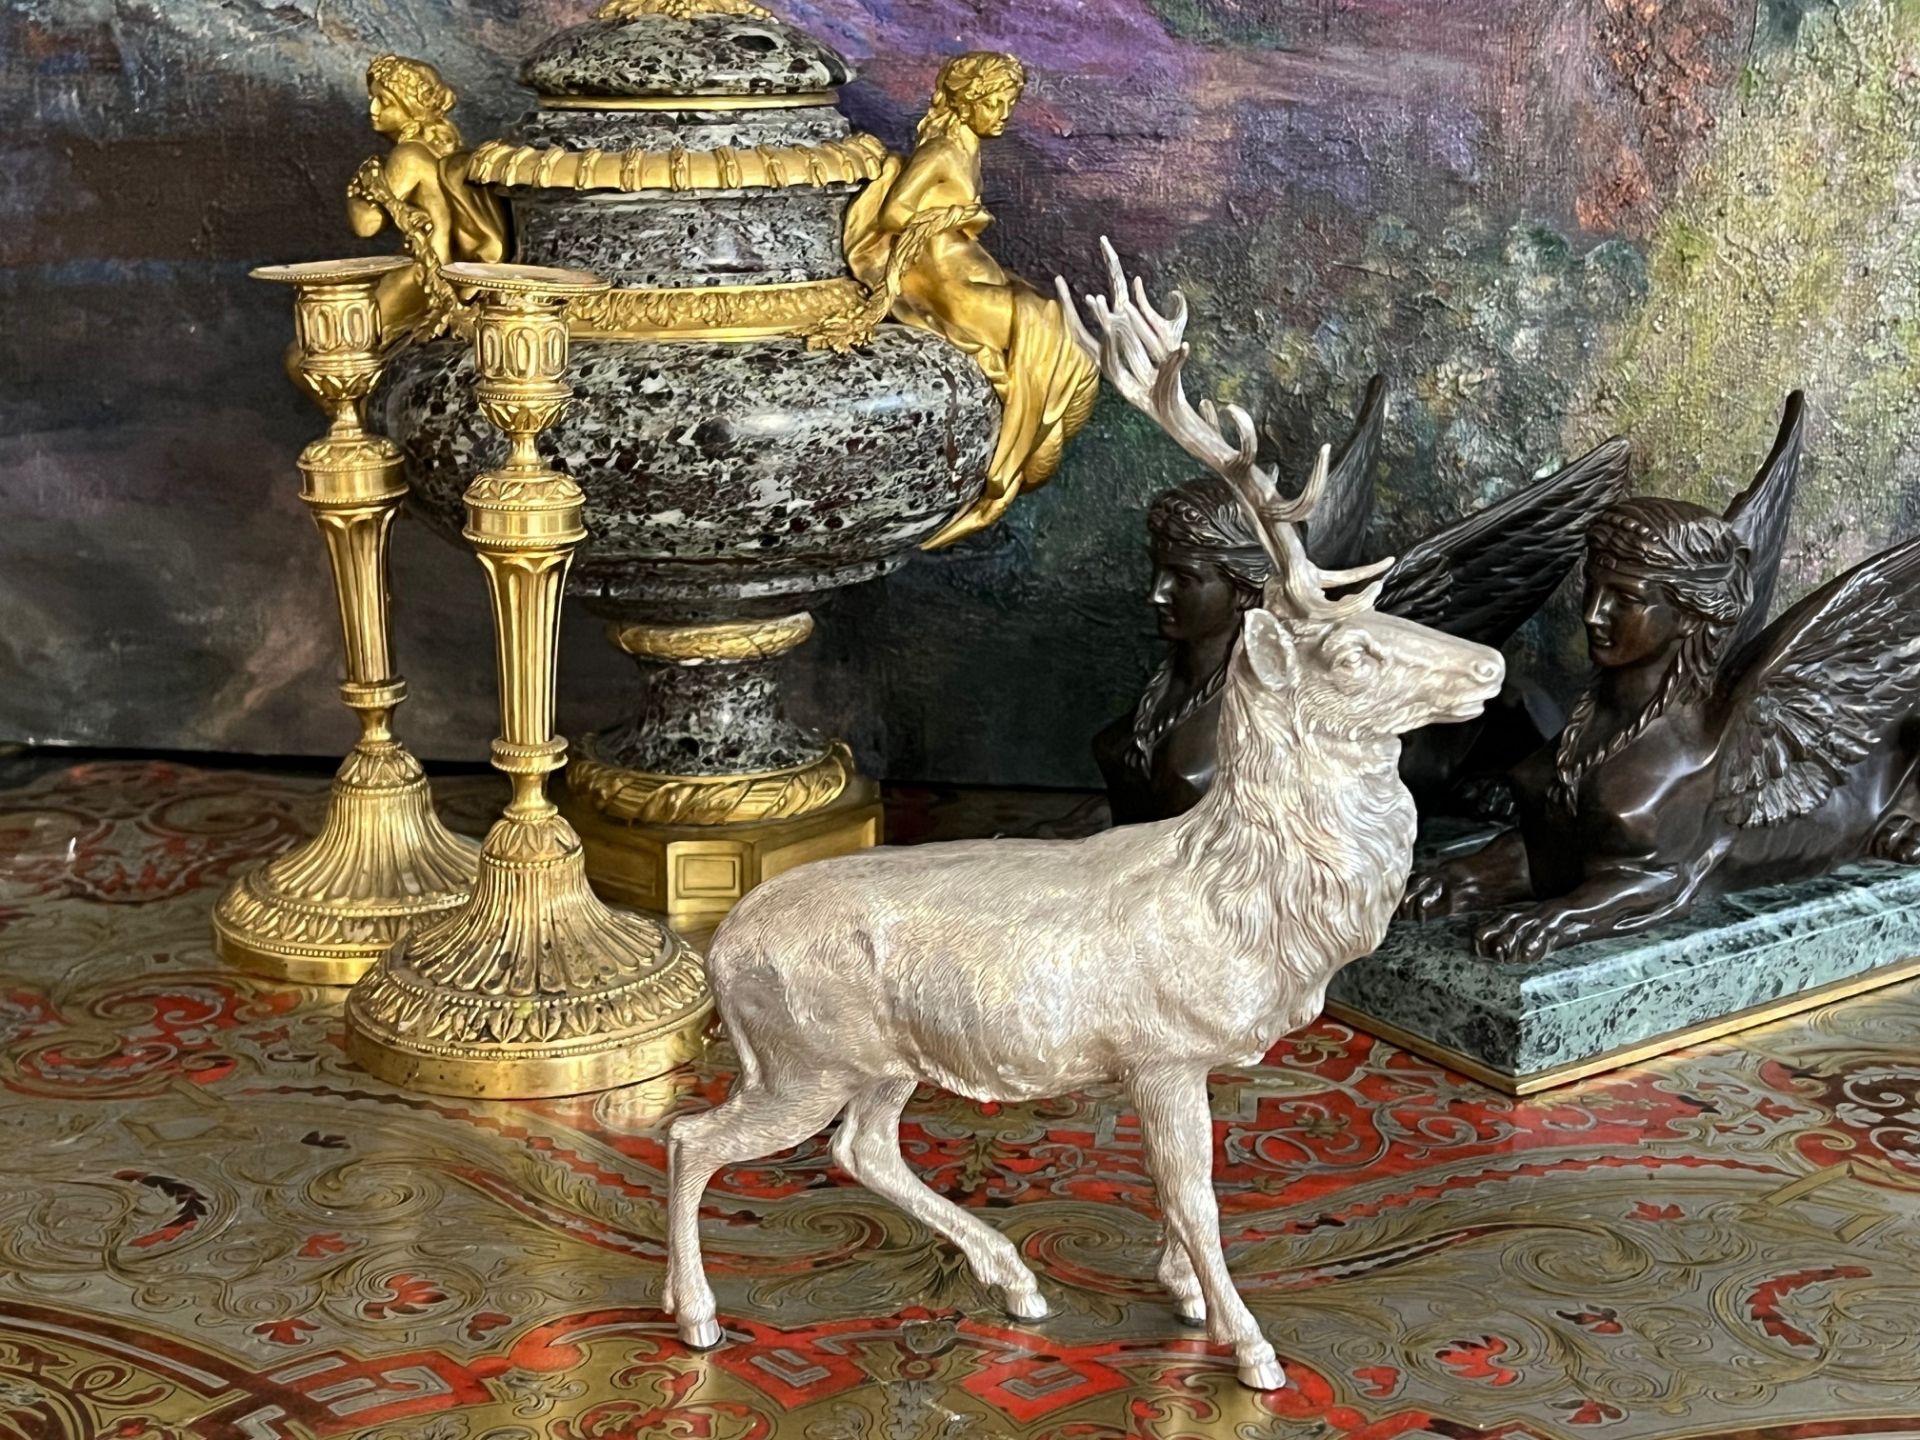 A FINE STERLING SILVER MODEL OF A STAG BY C.J. VANDER - Image 2 of 9